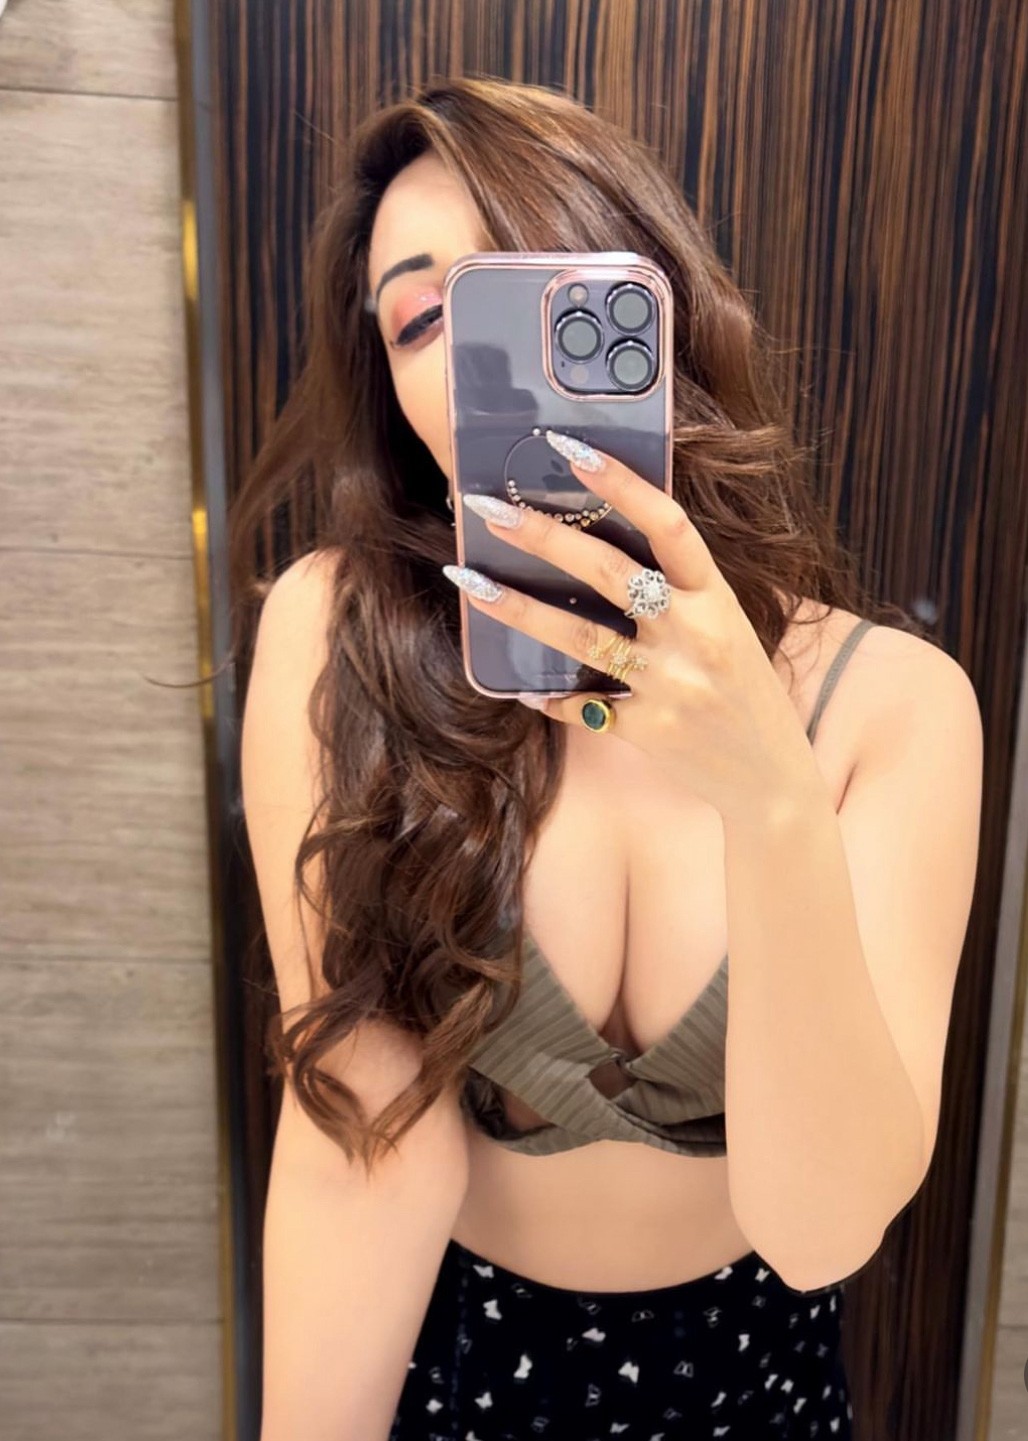 Call Girls From Sector 25 Gurgaon ❤️8448577510 ⊹Escorts,100% Verified Service In 24/7 Delhi NCR